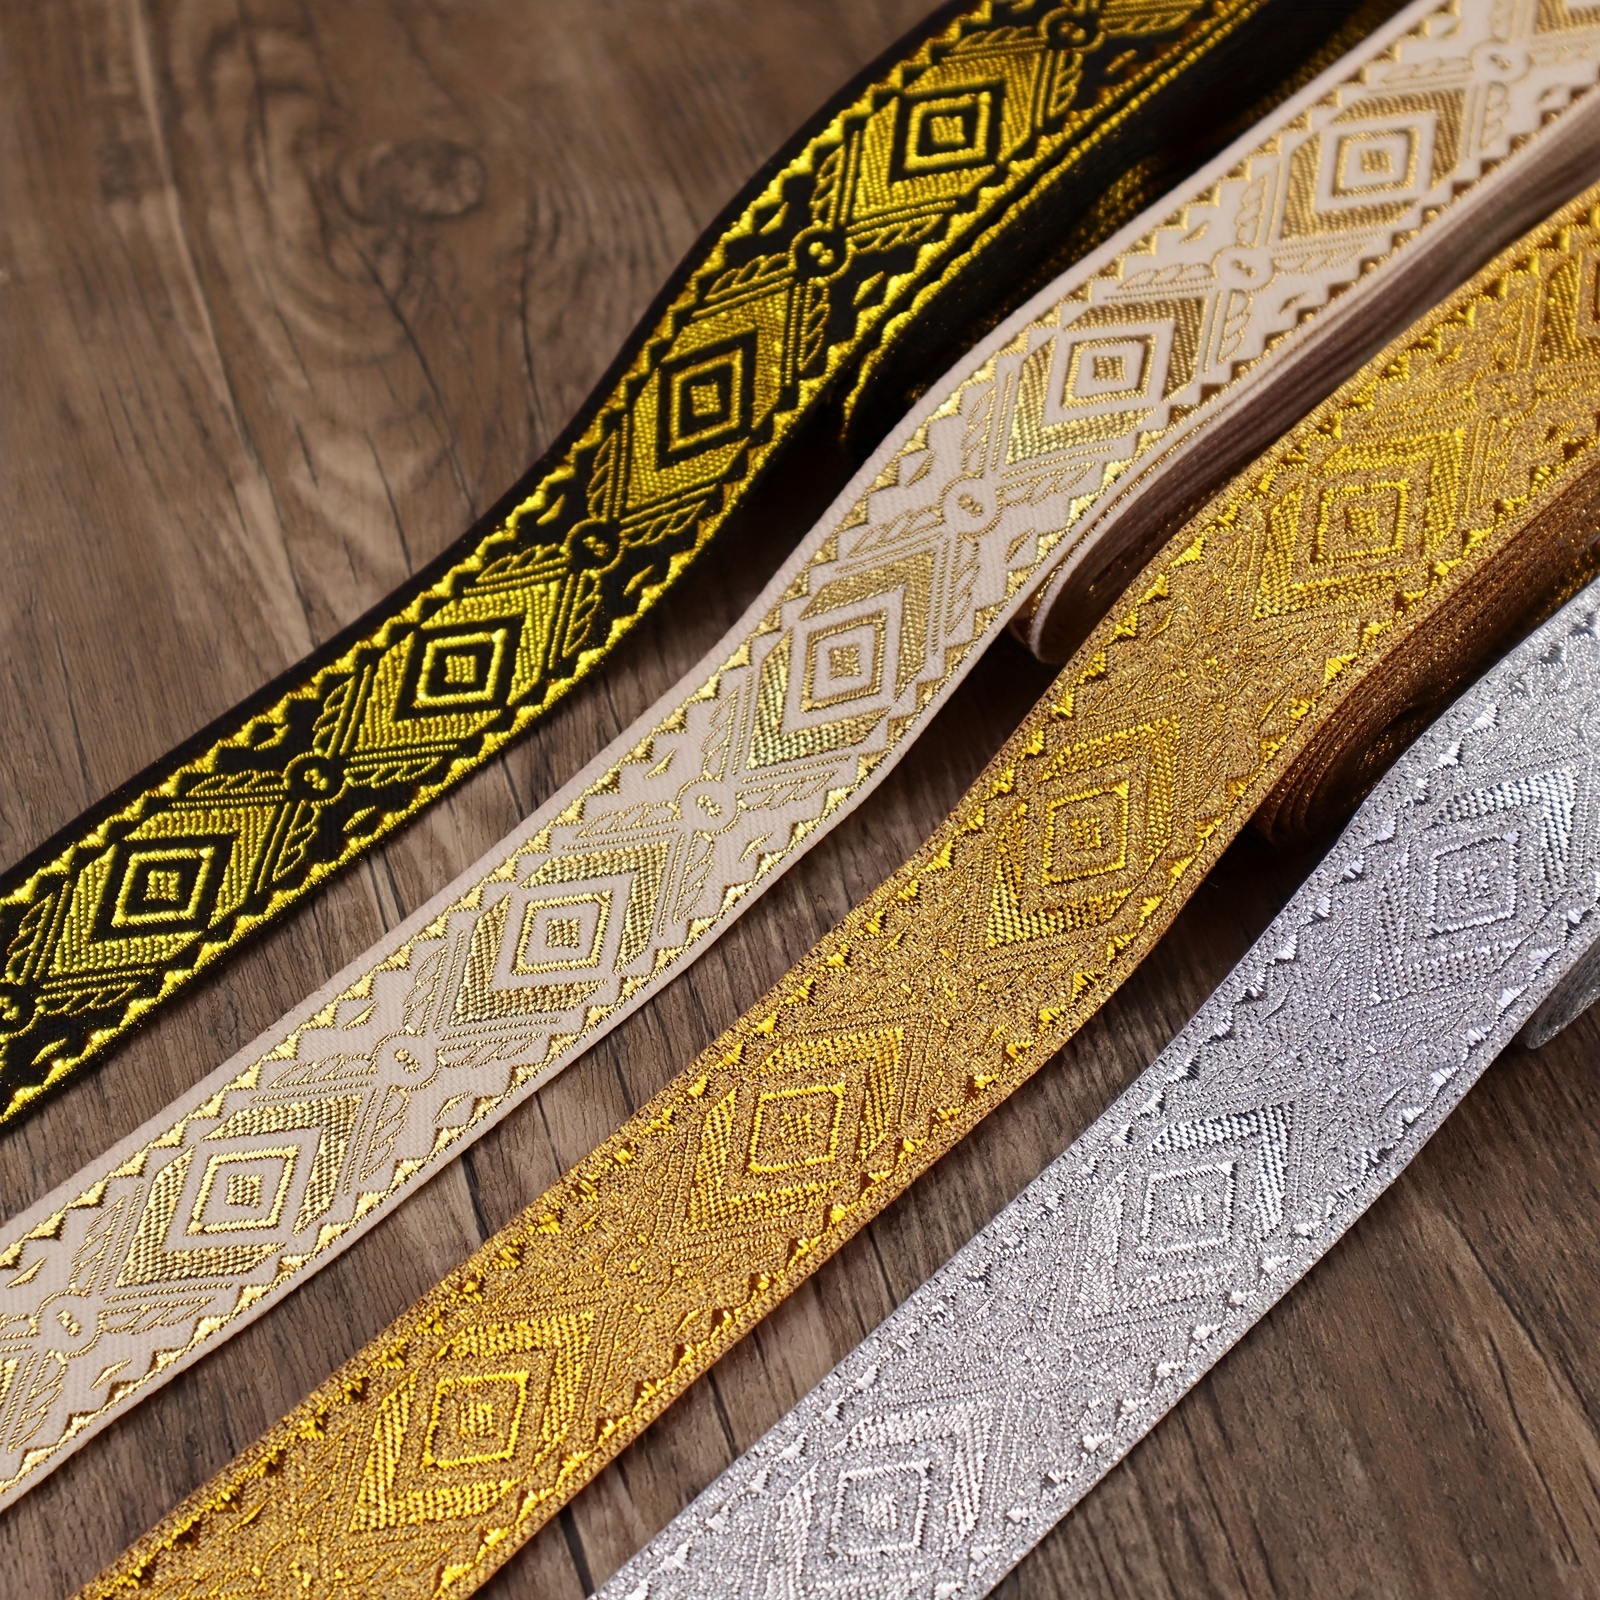 50mm Wide Boho Jacquard Ribbon Embroidery Jacquard Trim 7m Long Black Gold  Ethnic Ribbon Embroidery Polyester Ribbons for Sewing